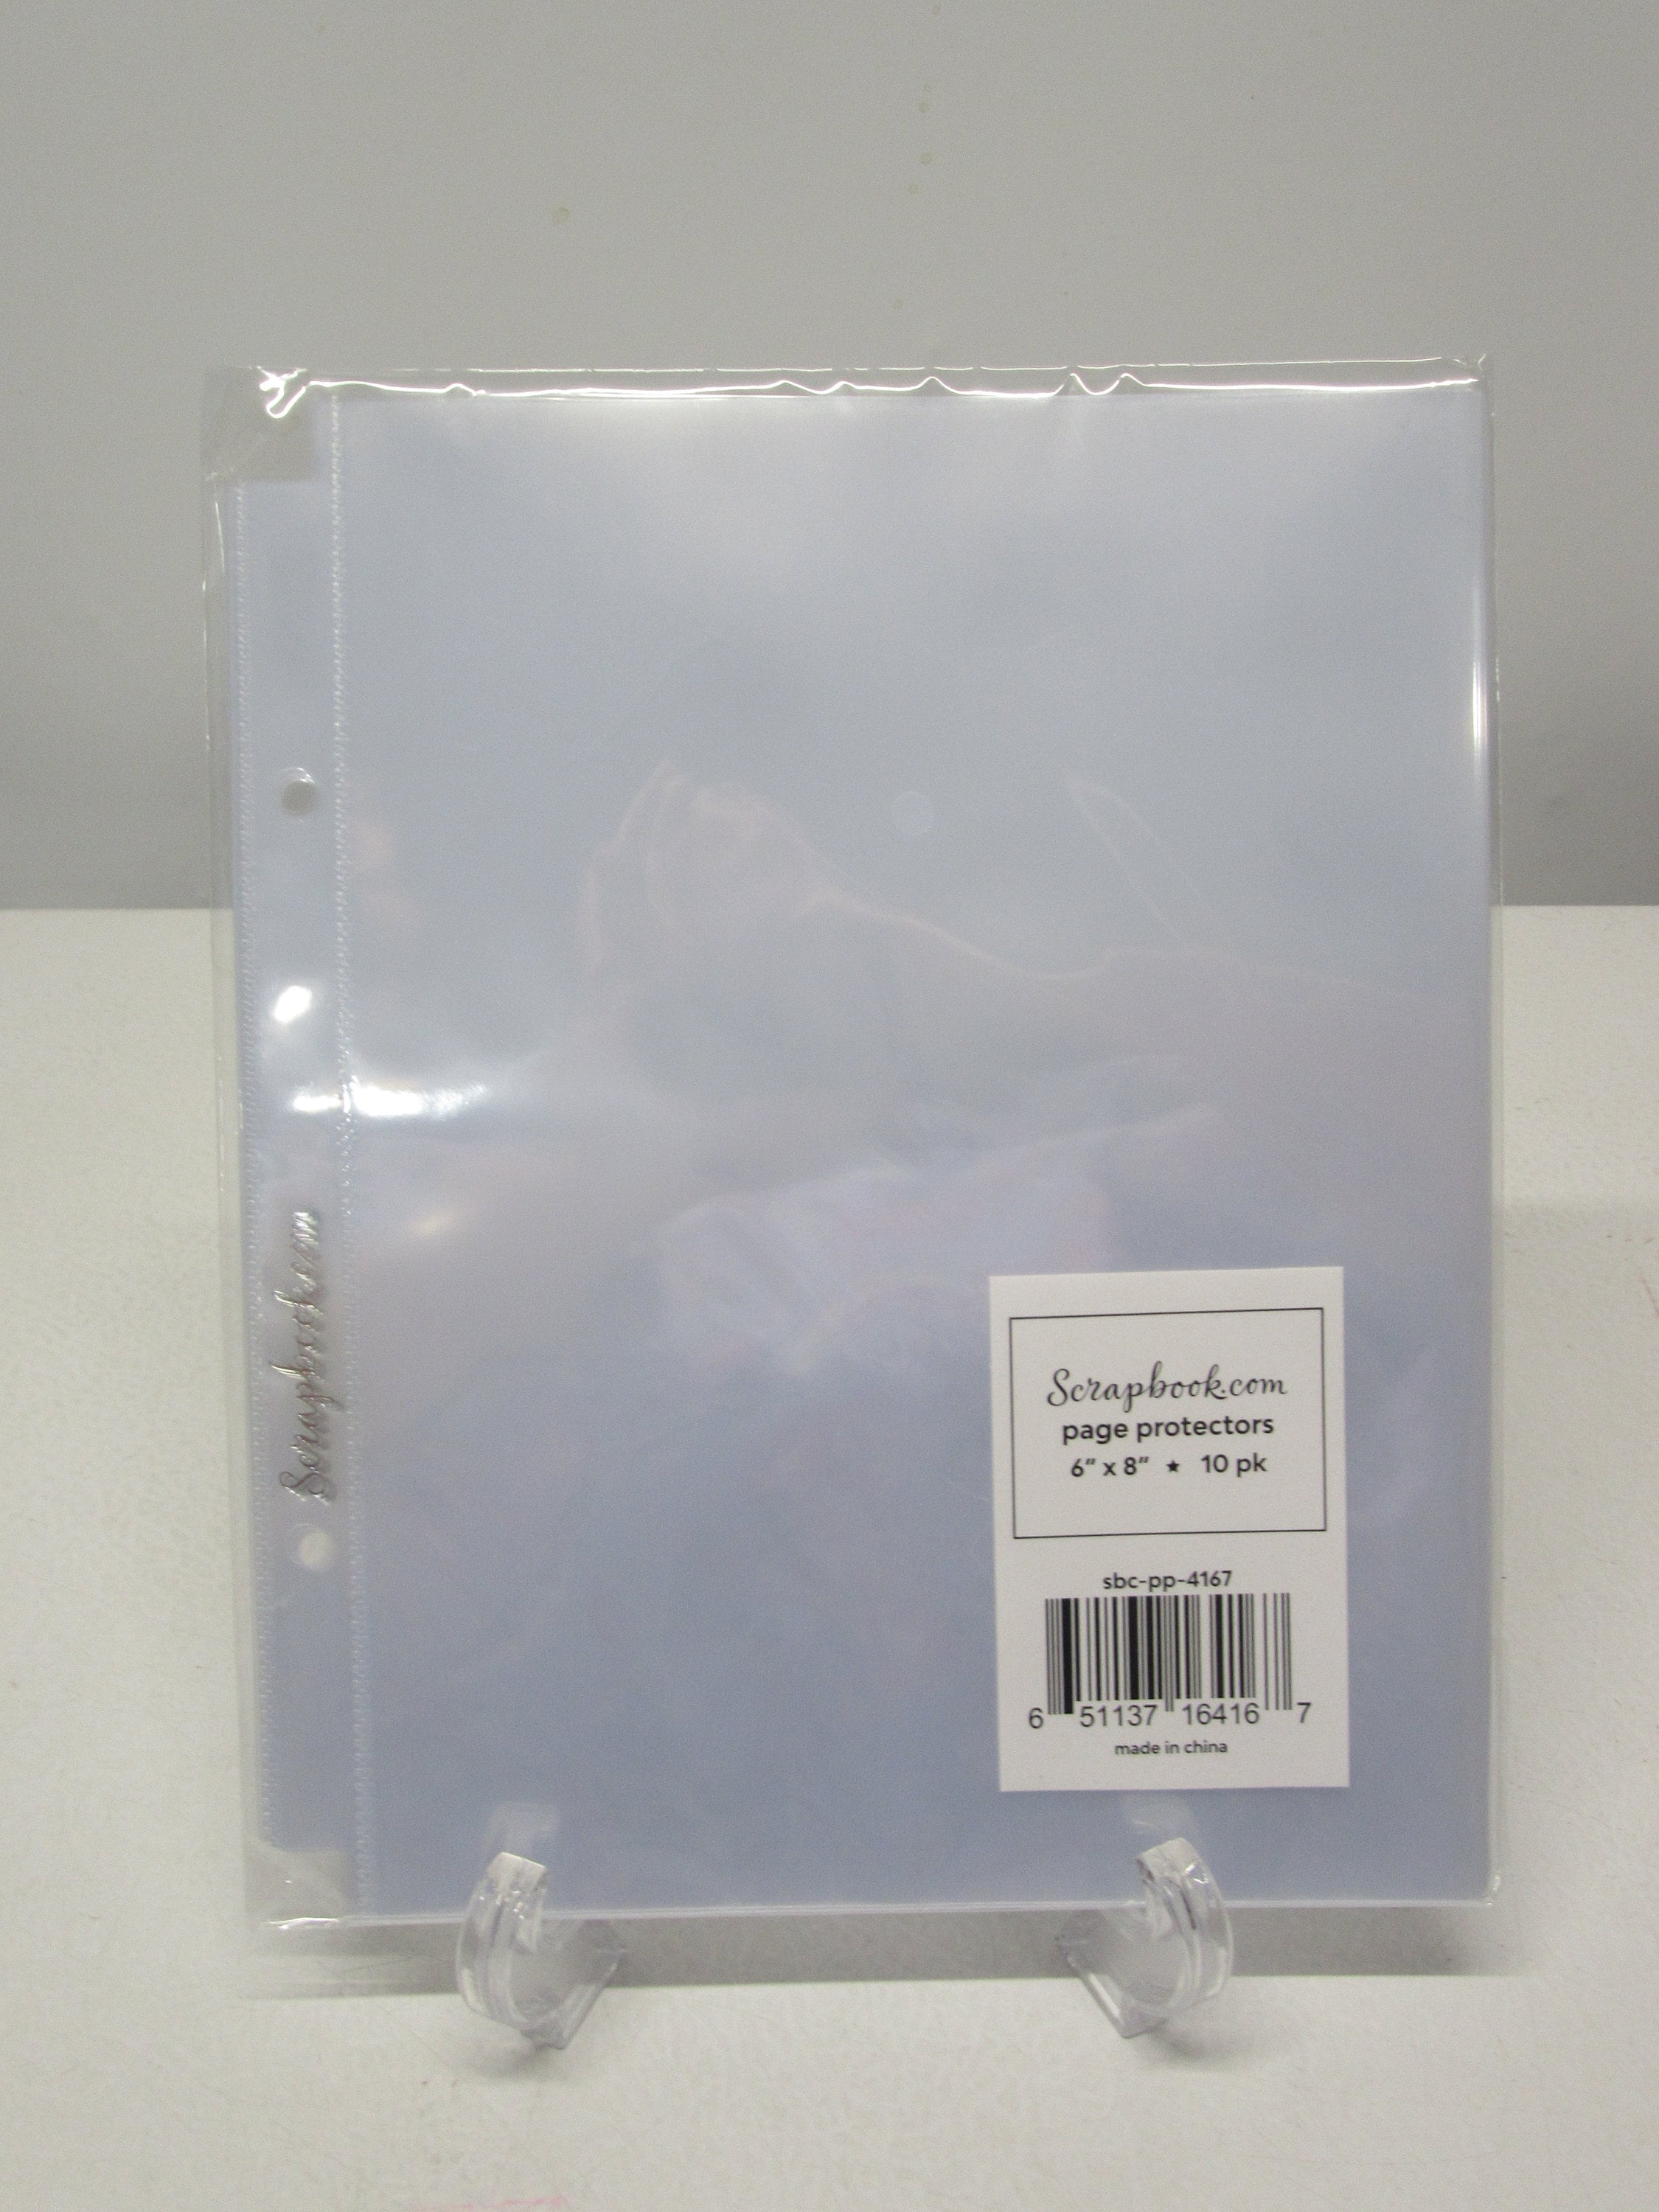 We R Memory Keepers Photo Sleeves 25 Sheets Holds 4x6 inch Photos 12x12  Lot 2